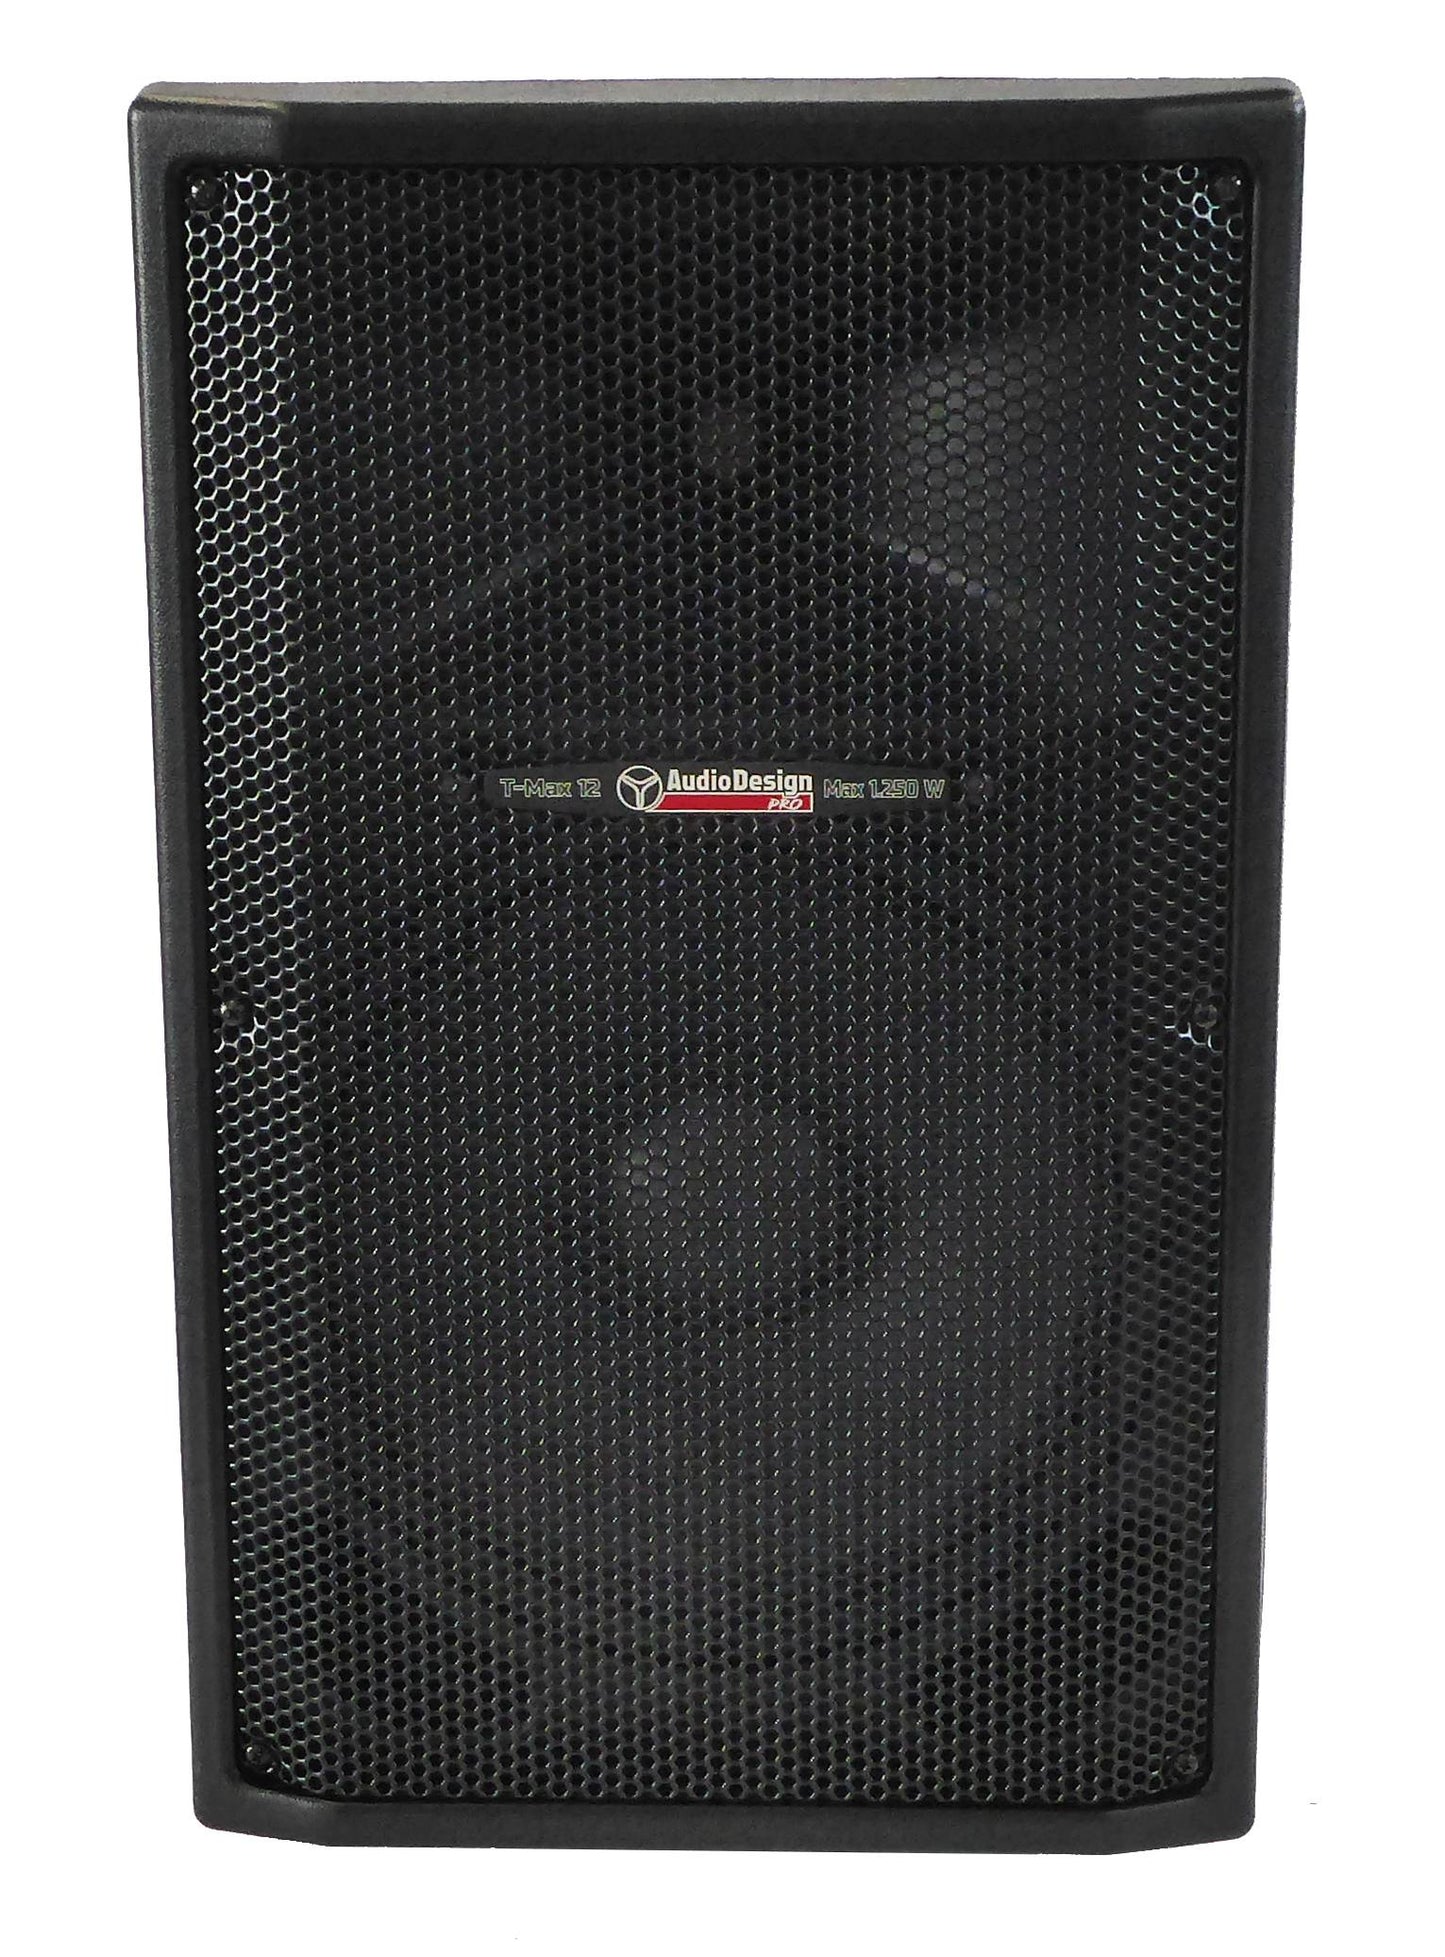 AudioDesign Pro T-MAX12 Professional 2-way active speaker, cabinet with 320 mm woofer and 1250W power